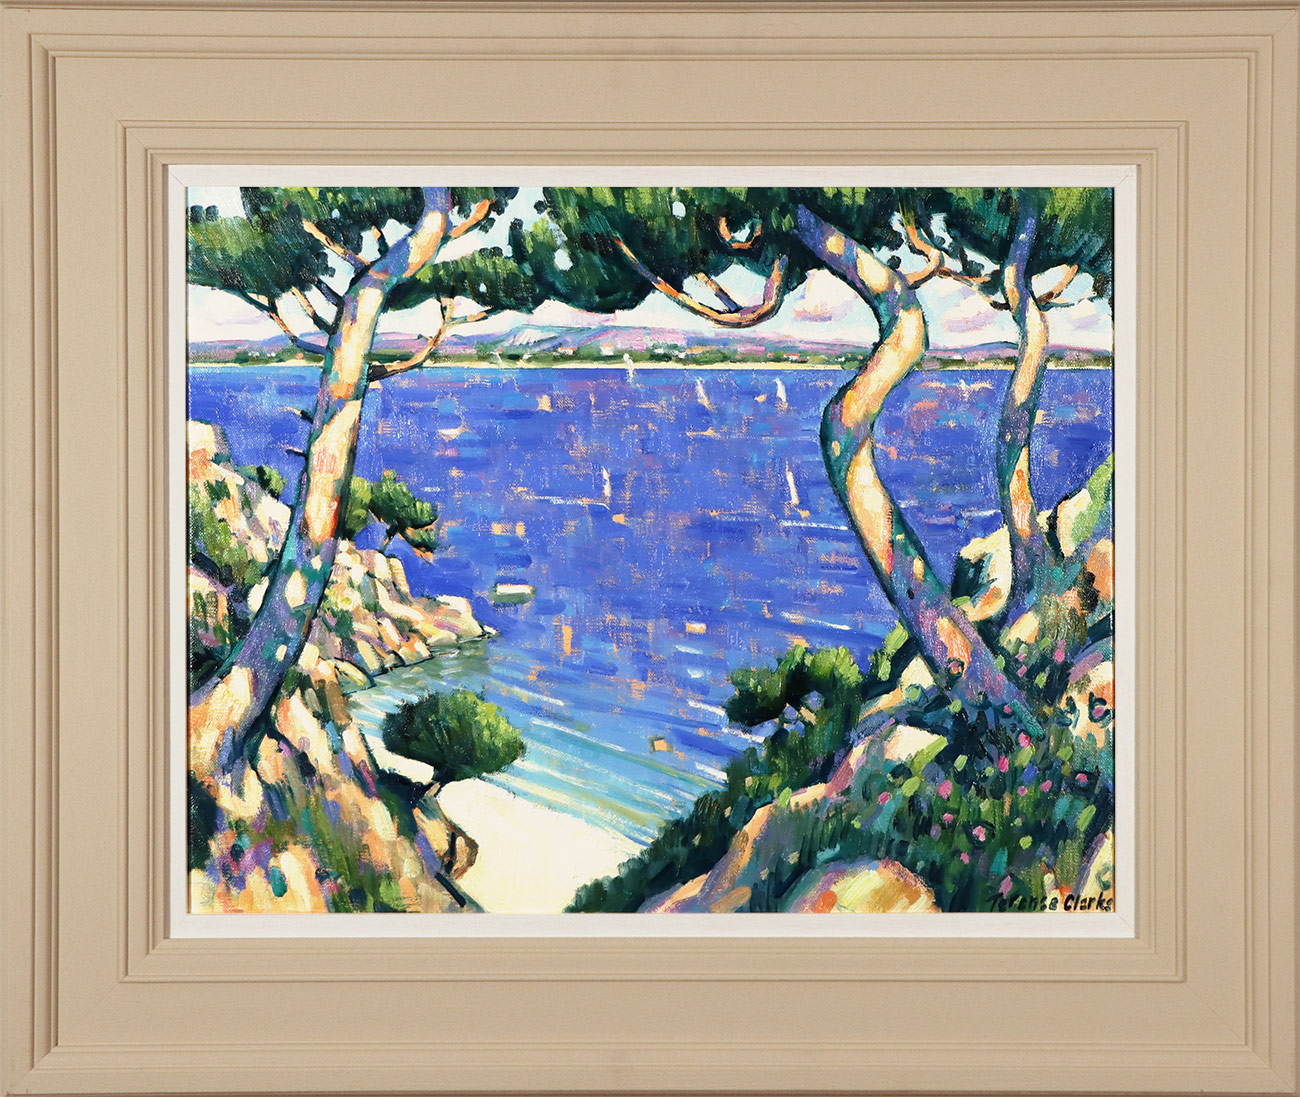 Terence Clarke, Original oil painting on canvas, Little Bay near La Ciotat. Click to enlarge